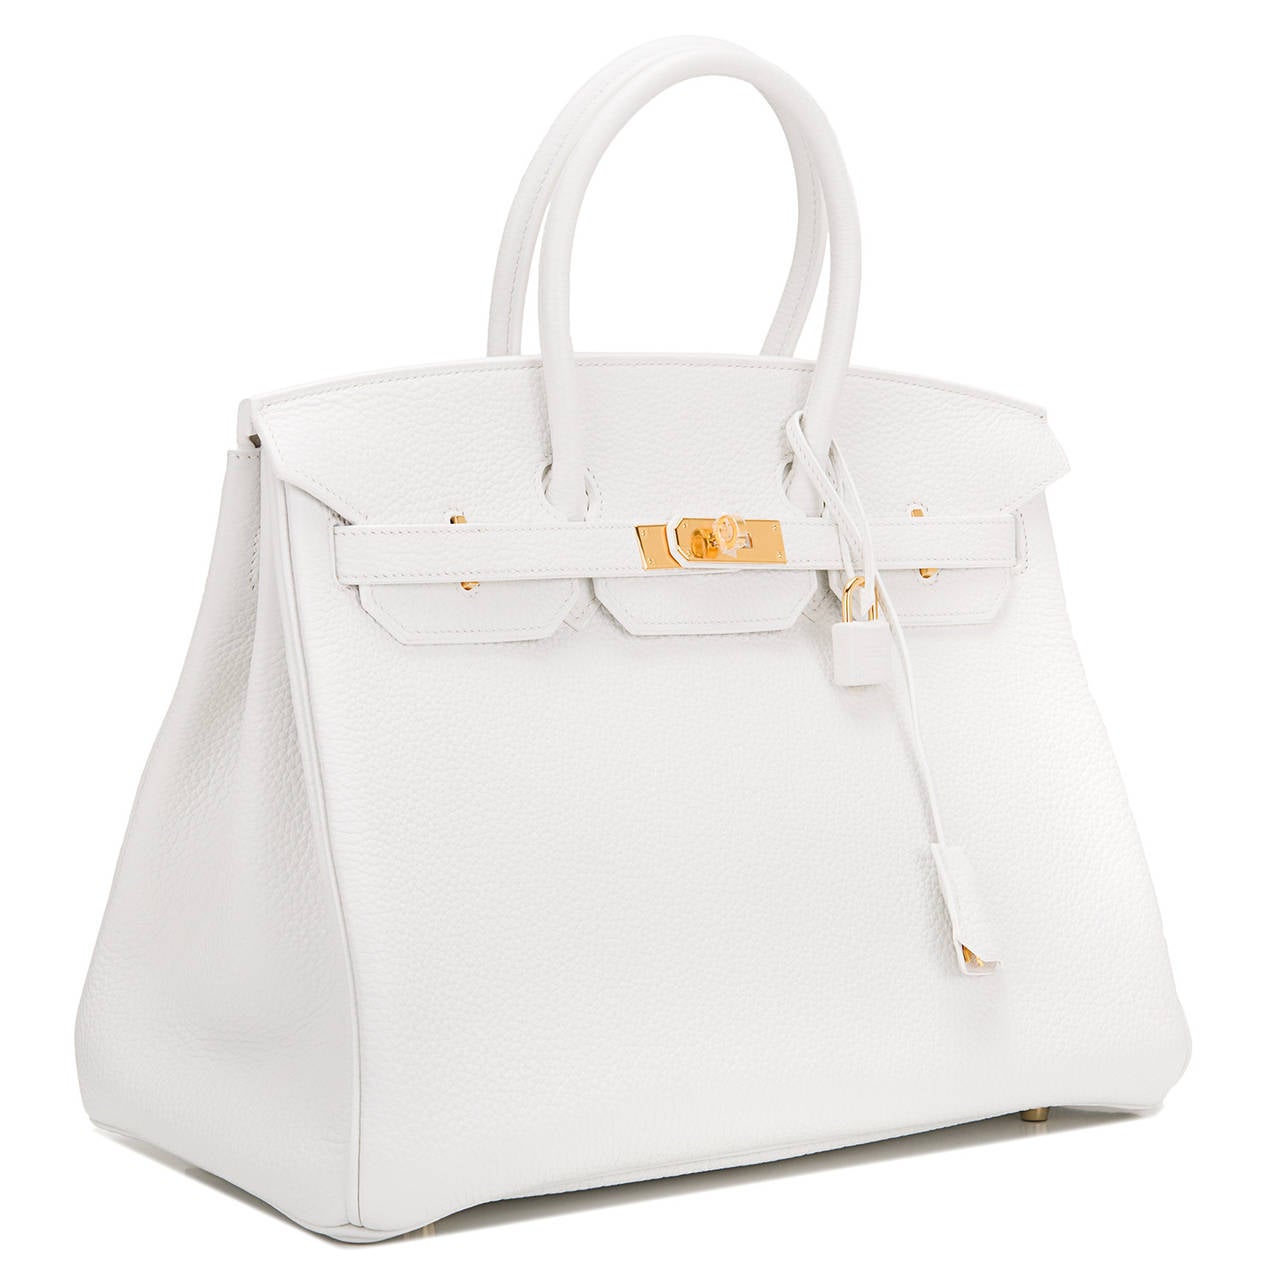 Hermes white Birkin 35cm in taurillon clemence (baby bull) leather with gold hardware.

This white Birkin features tonal stitching, front toggle closure, clochette with lock and two keys, and double rolled handles. The interior is lined in white